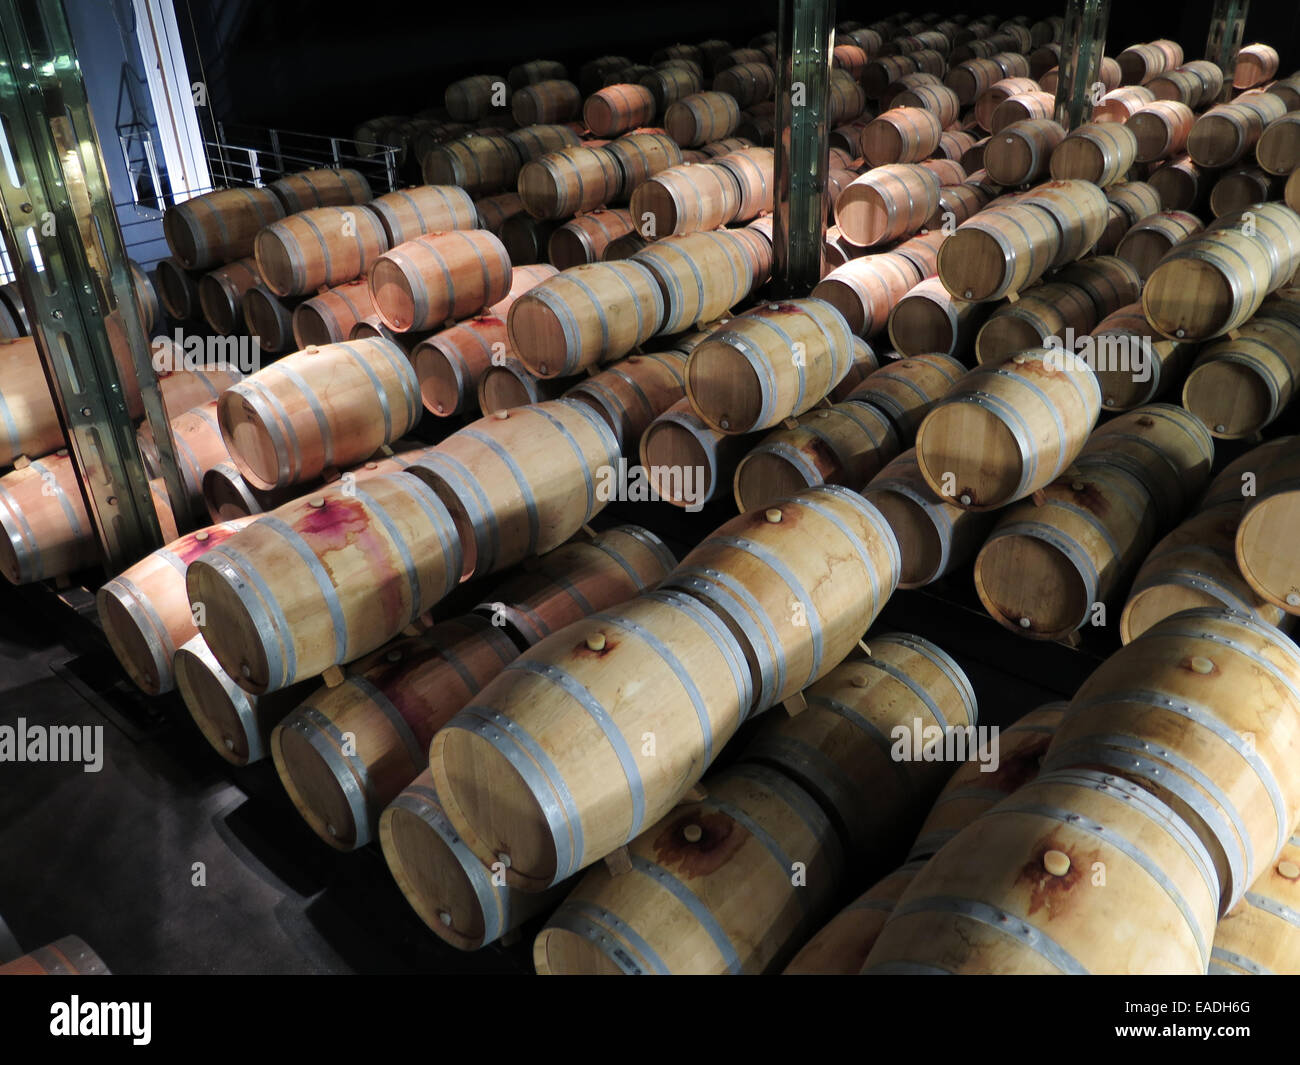 1 year old Oak Barrels in the Wine Cellar at Chateau Cos D'Estournel in the Saint-Estephe appellation of Bordeaux, France Stock Photo